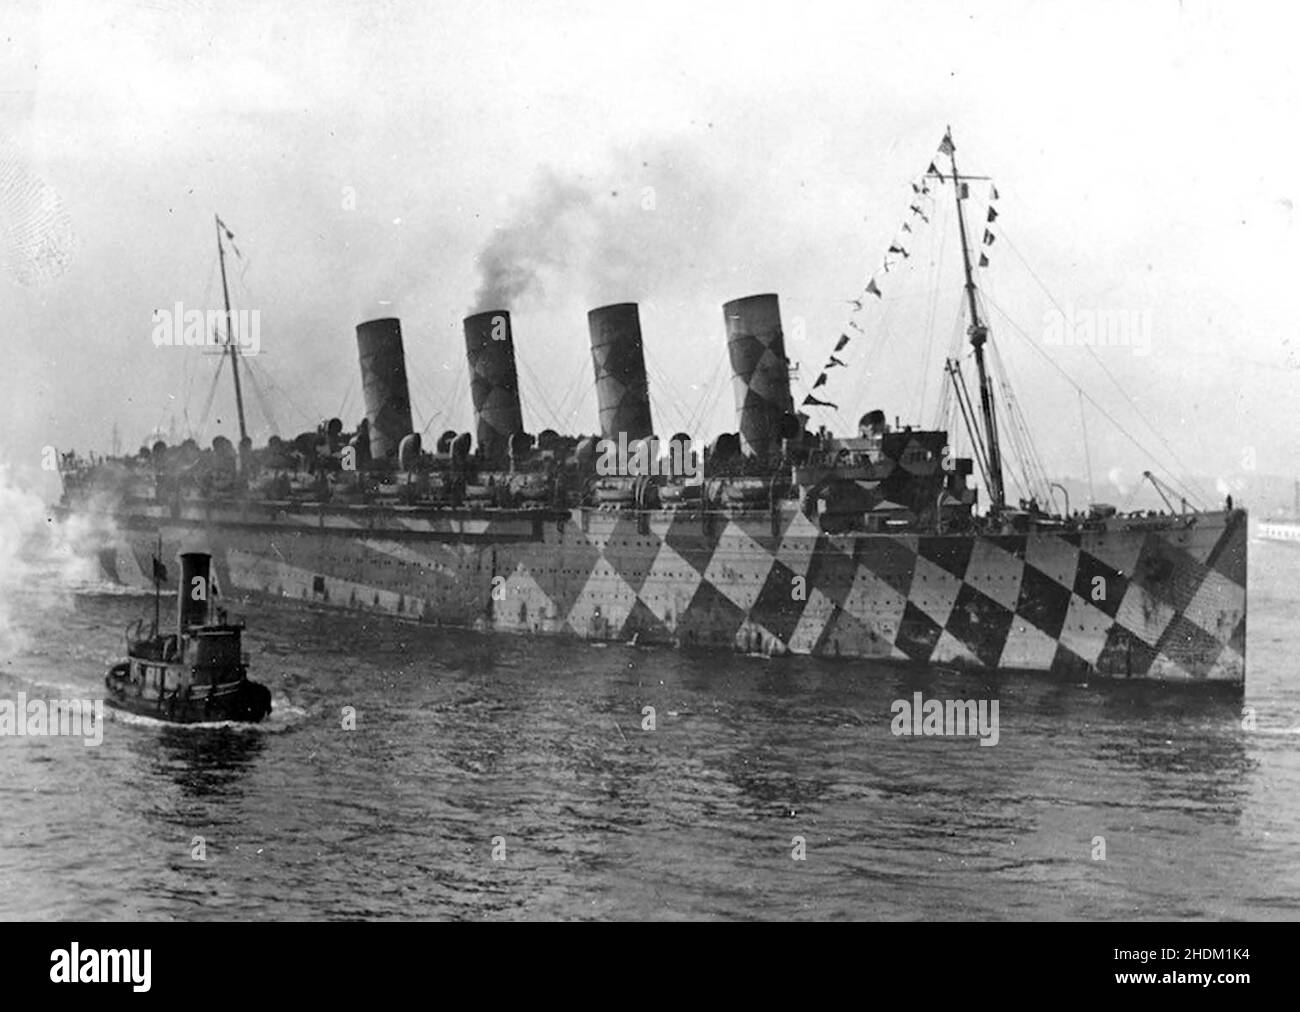 SHIPPING CAMOUFLAGE First World War. Former German ship Vaterland, renamed USS Leviathan, as a troop carrier in 1917. Stock Photo